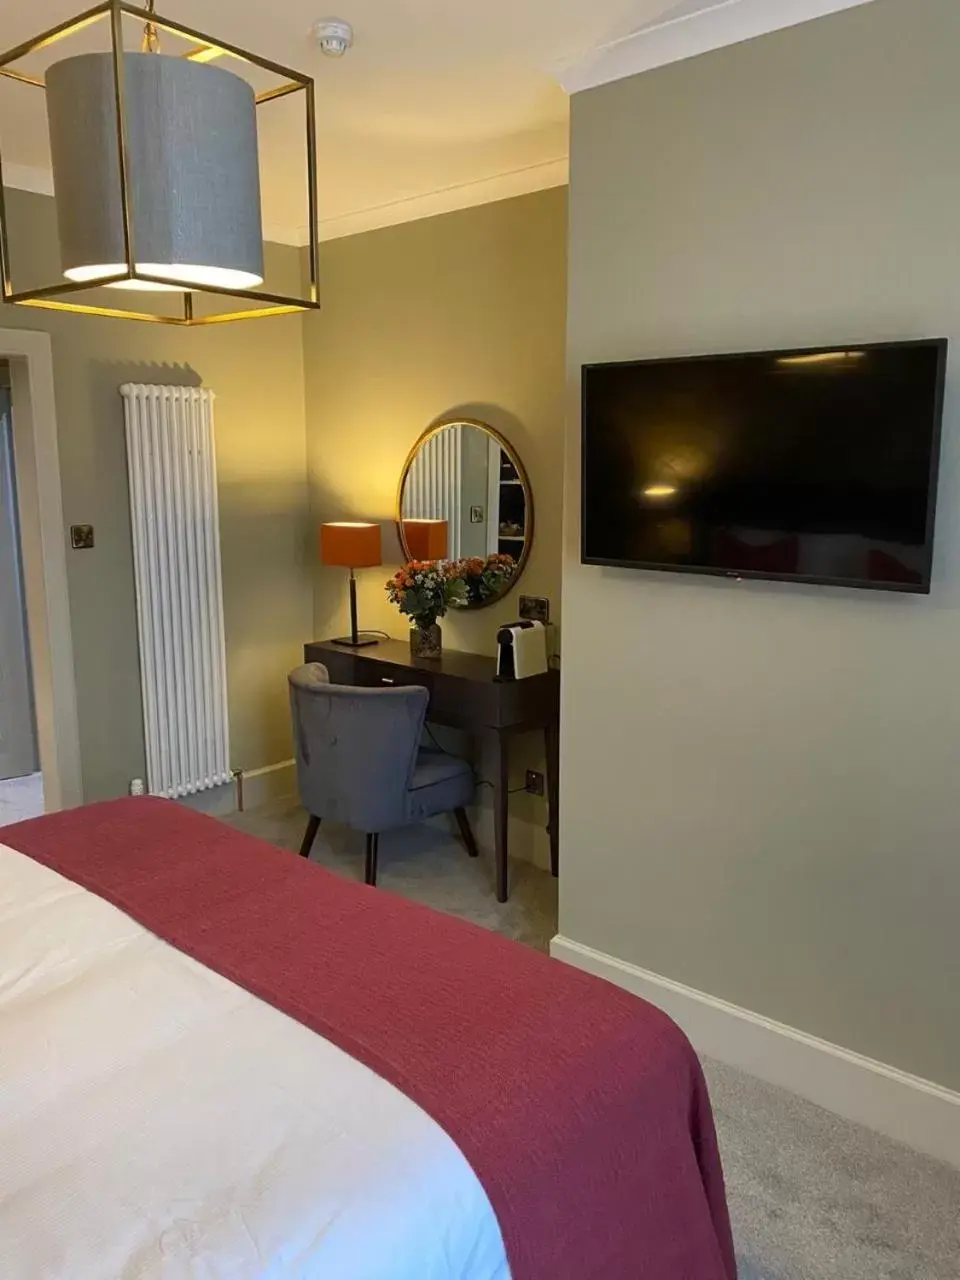 TV/Entertainment Center in Rooms at the Saint